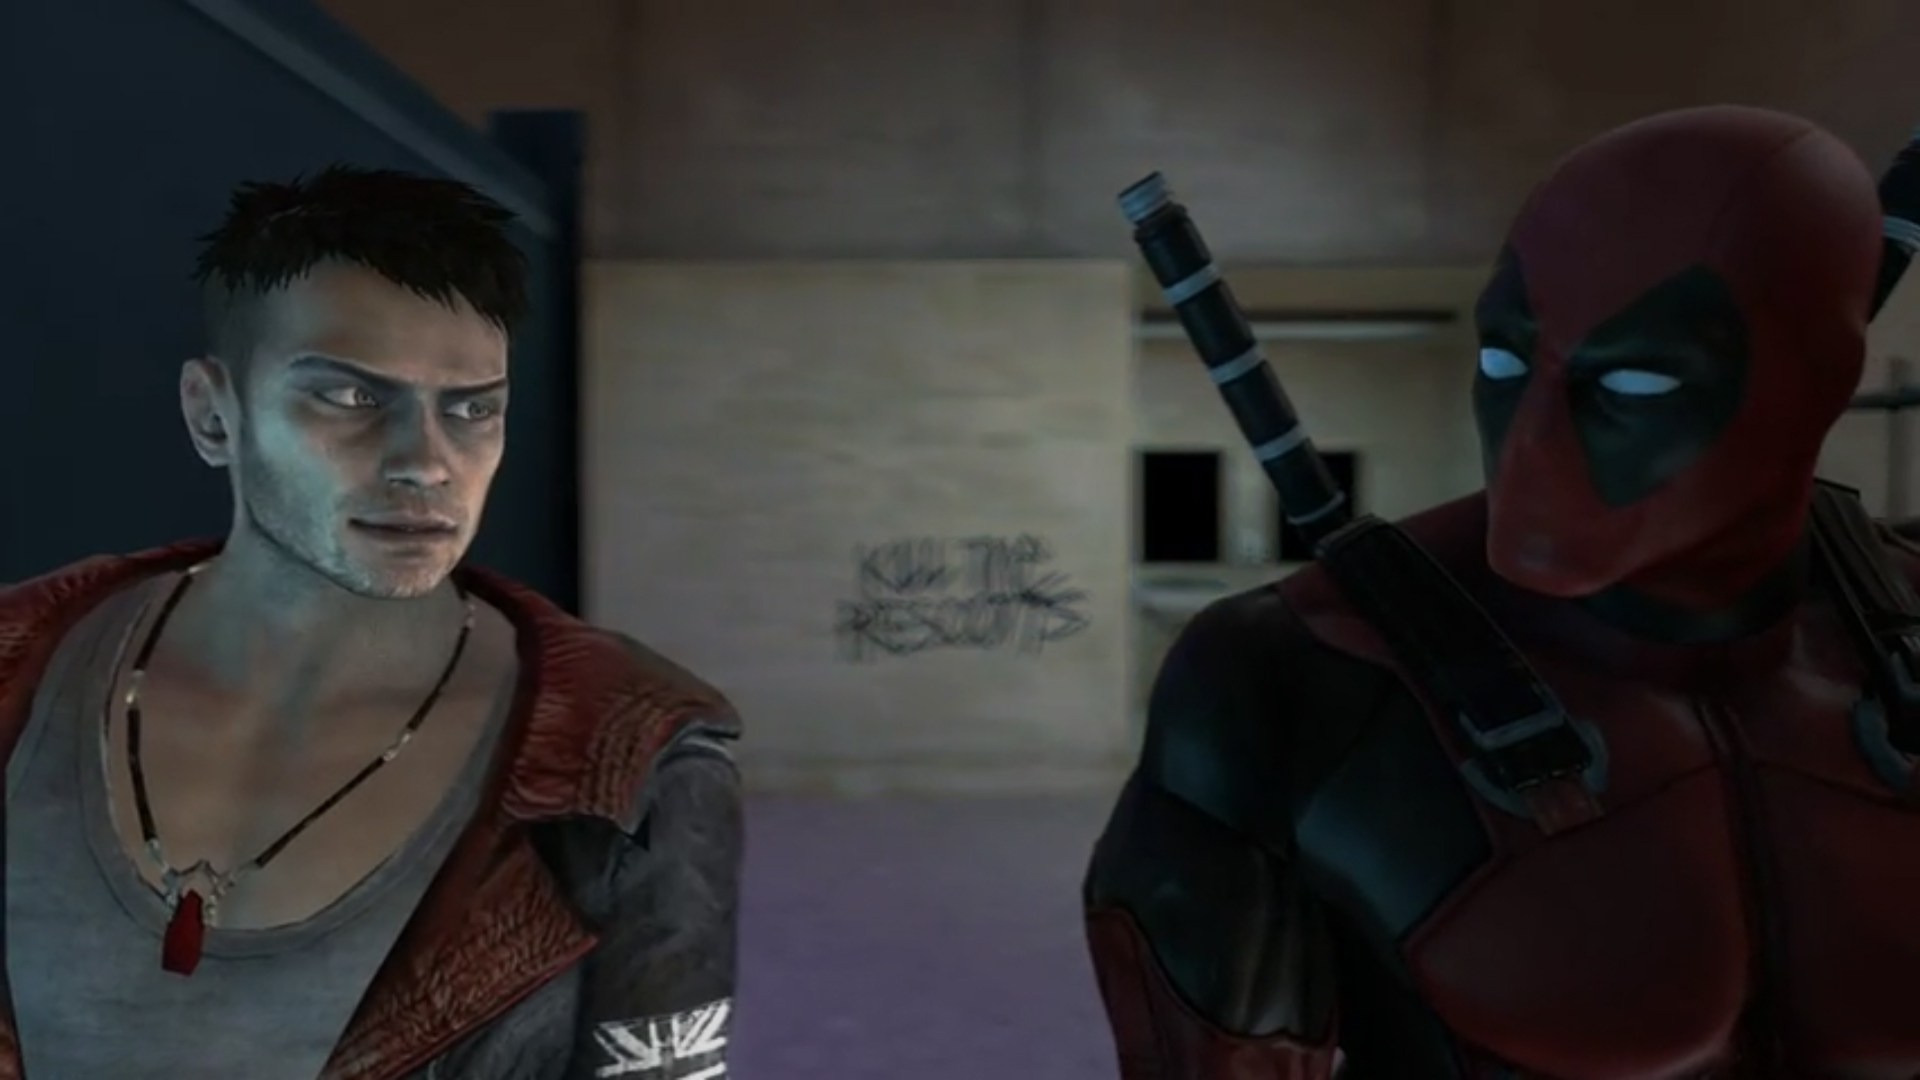 Jsh x SFM Deadpool and Devil May Cry Dante are Having Some Fun in the Night Club Men’s Room